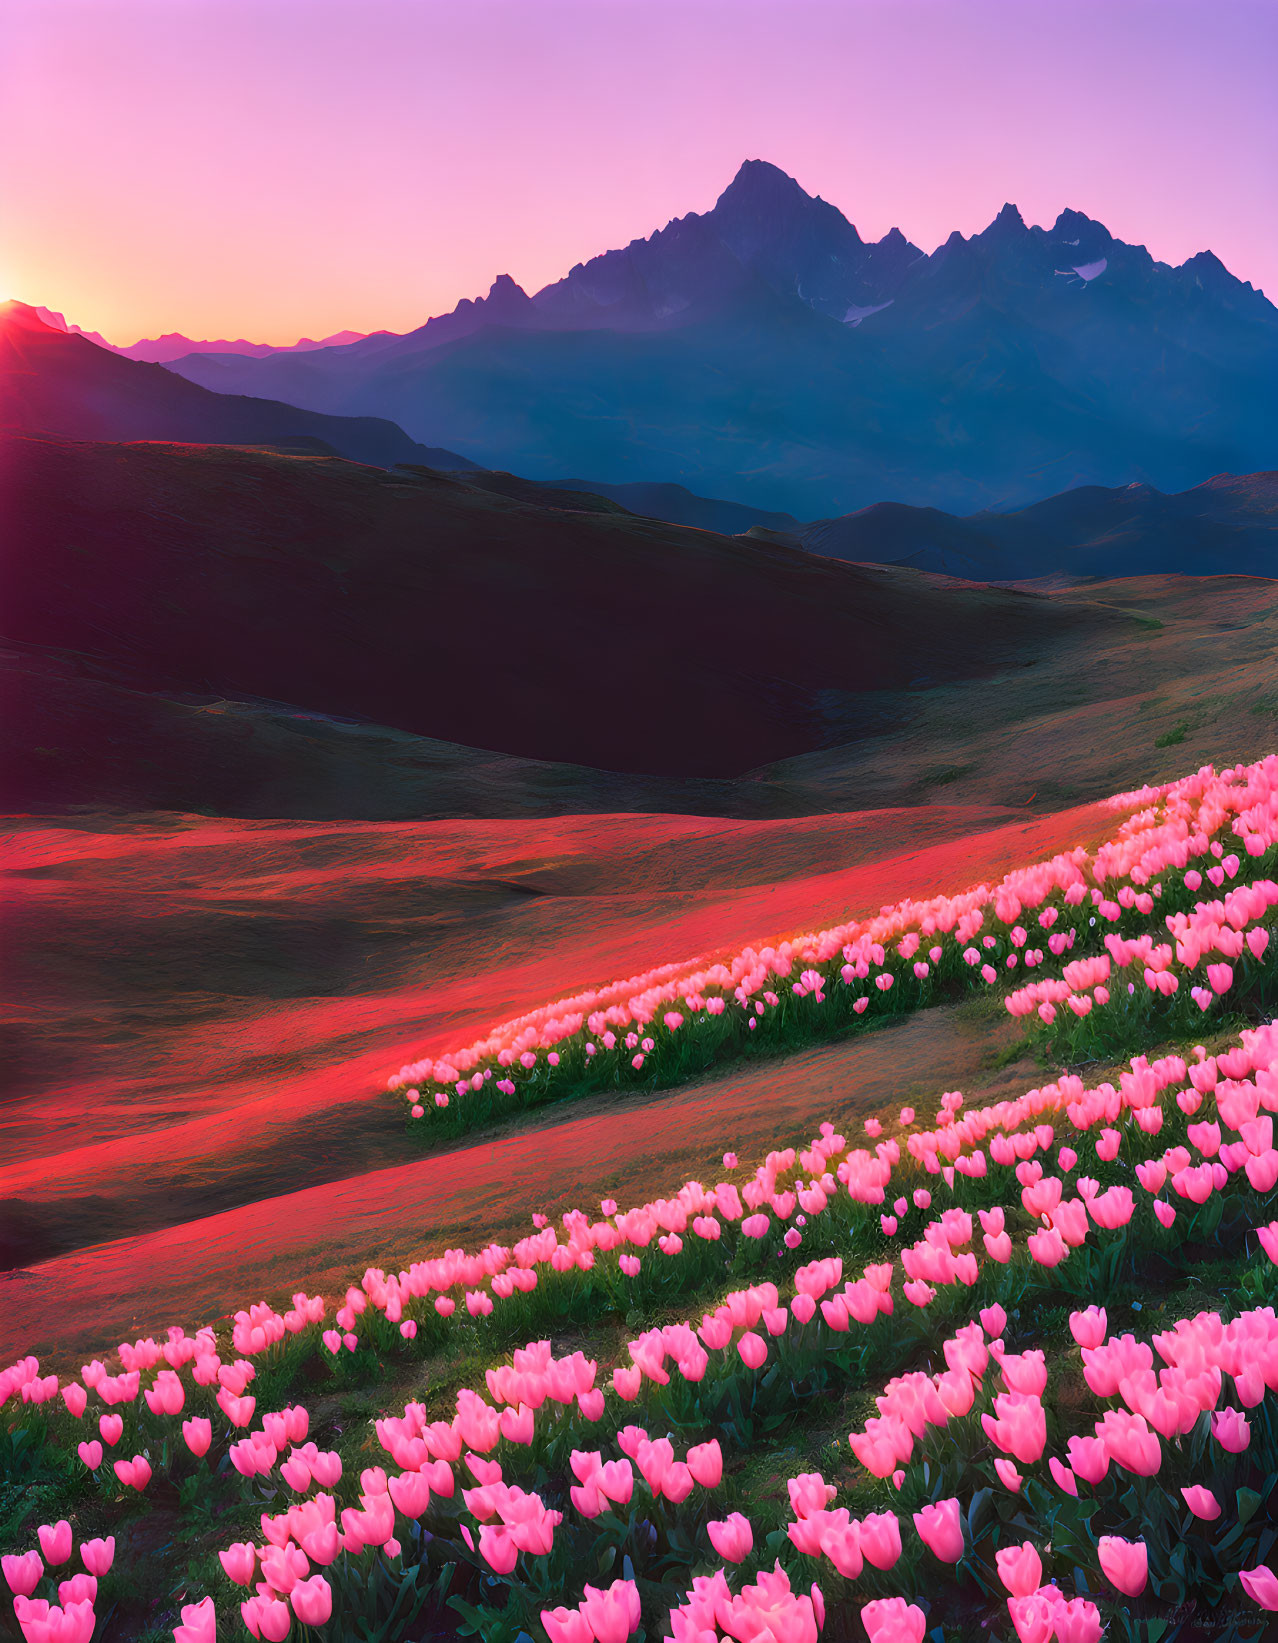 Scenic sunrise over mountain range with pink tulips